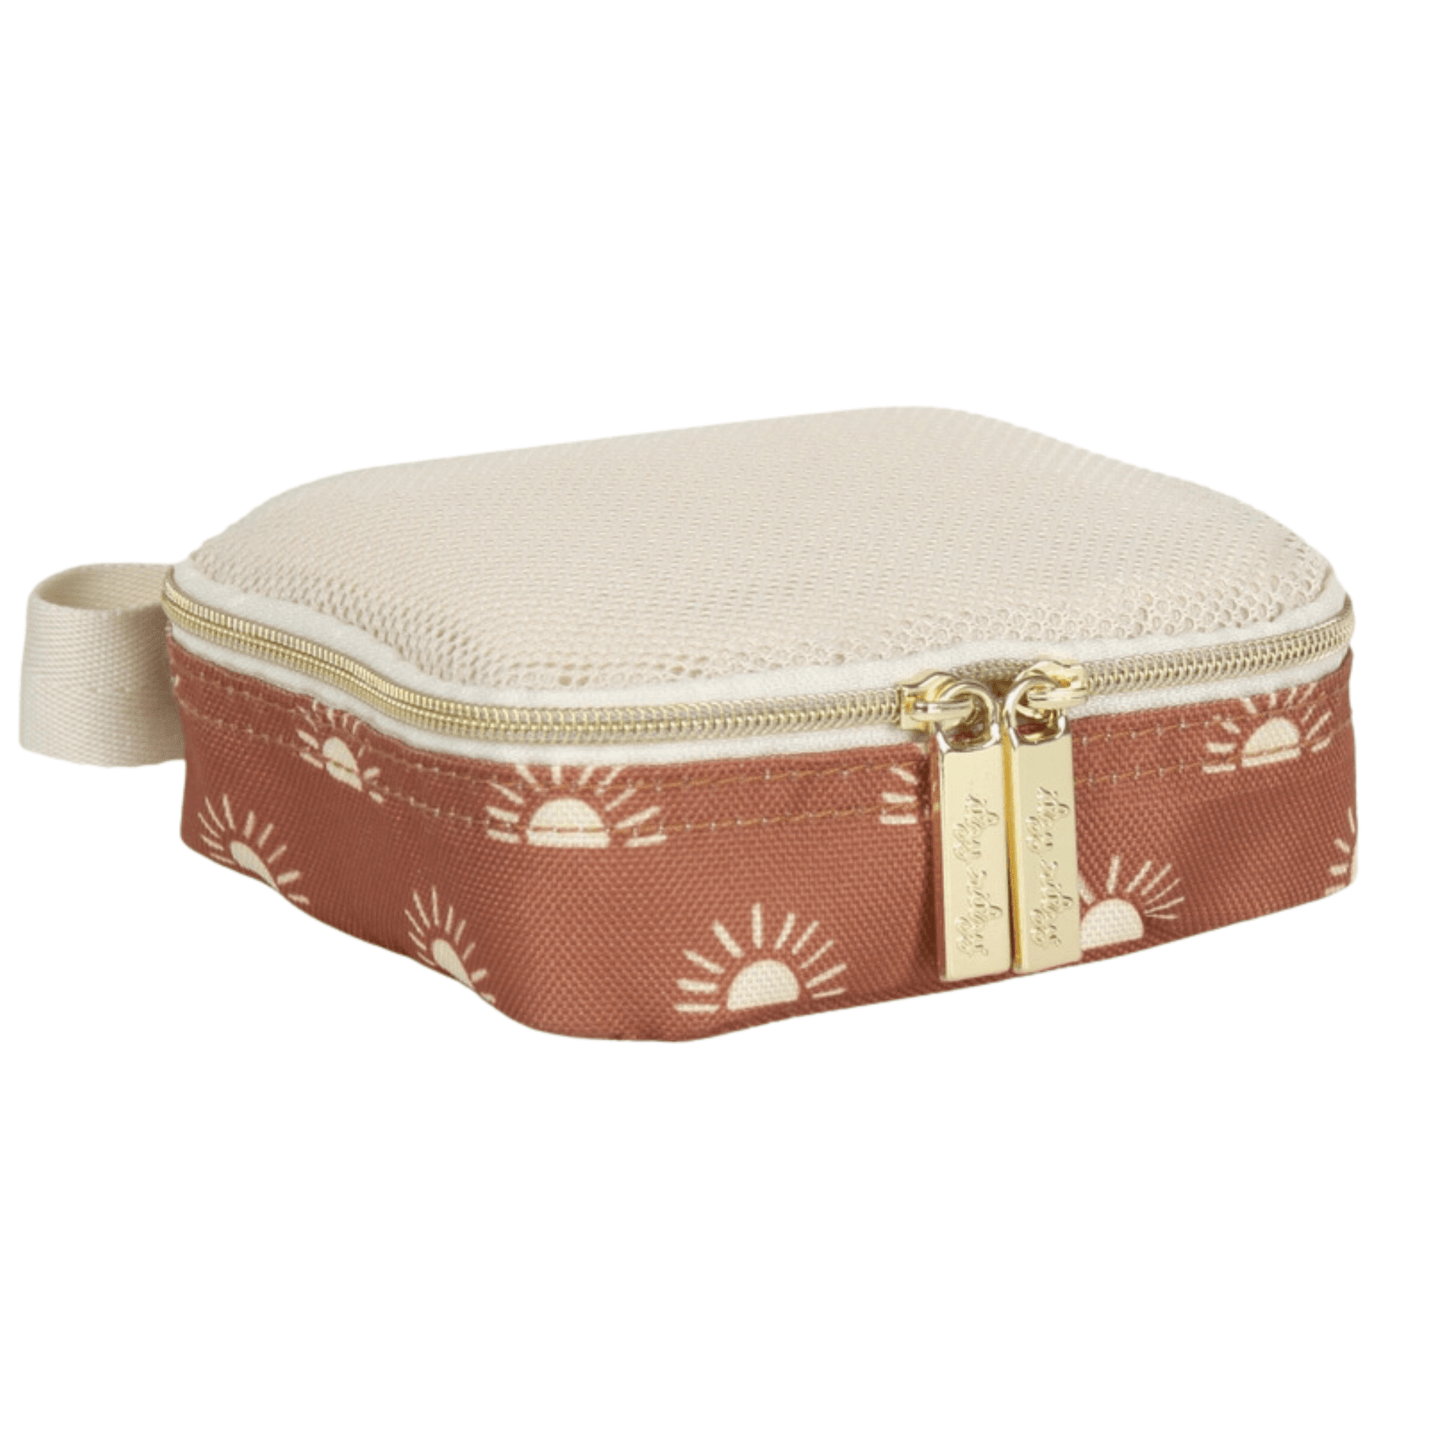 Itzy Ritzy Terracotta Sun Pack Like A Boss Packing Cubes & Travel Toiletries Bag